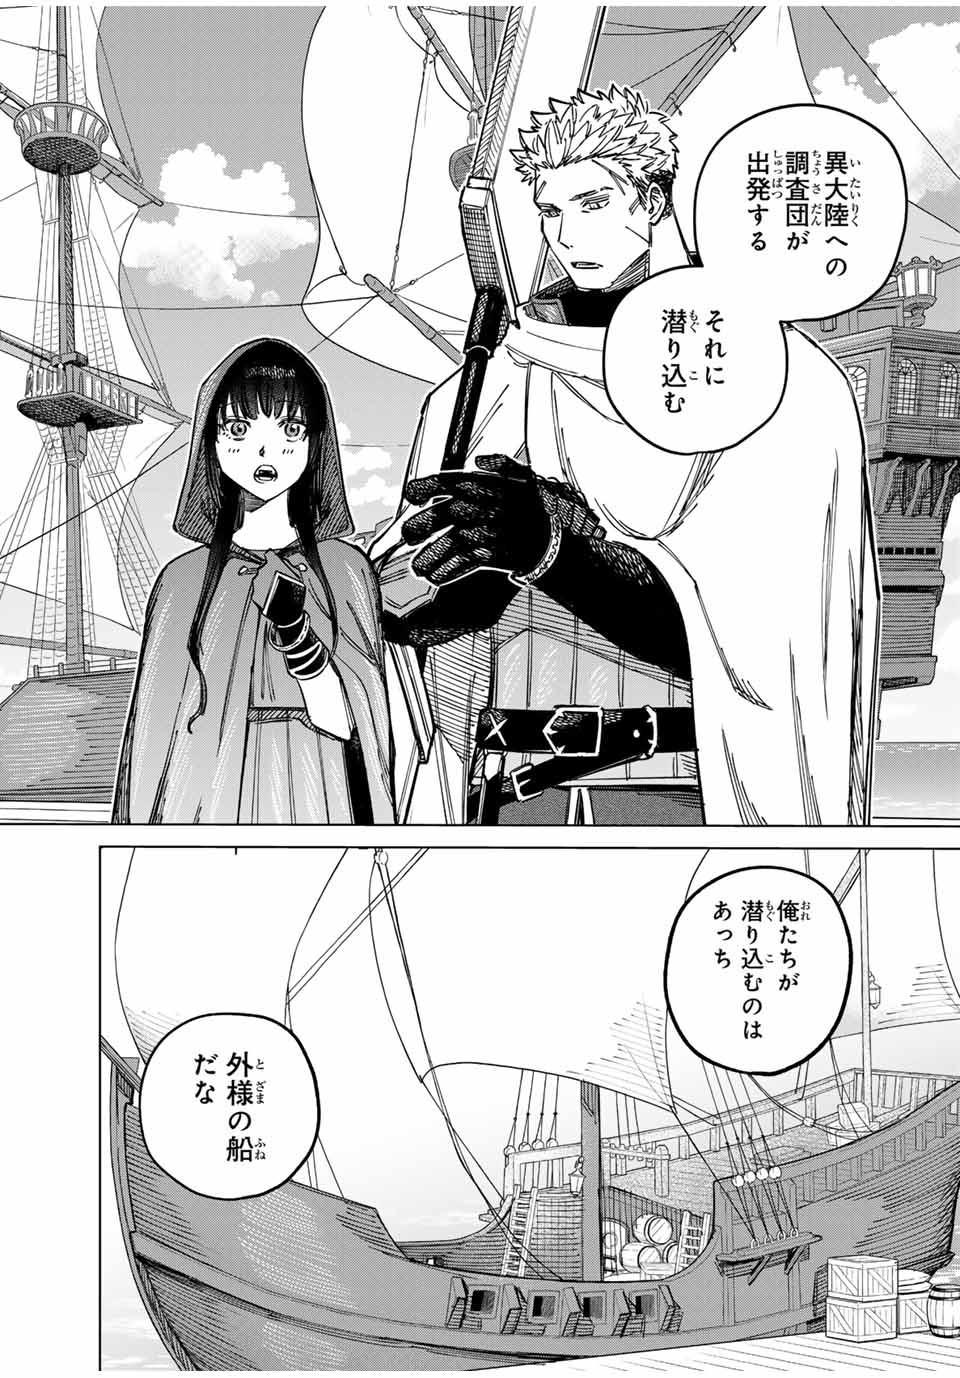 Witch and Mercenary 魔女と傭兵 第2話 - Page 24